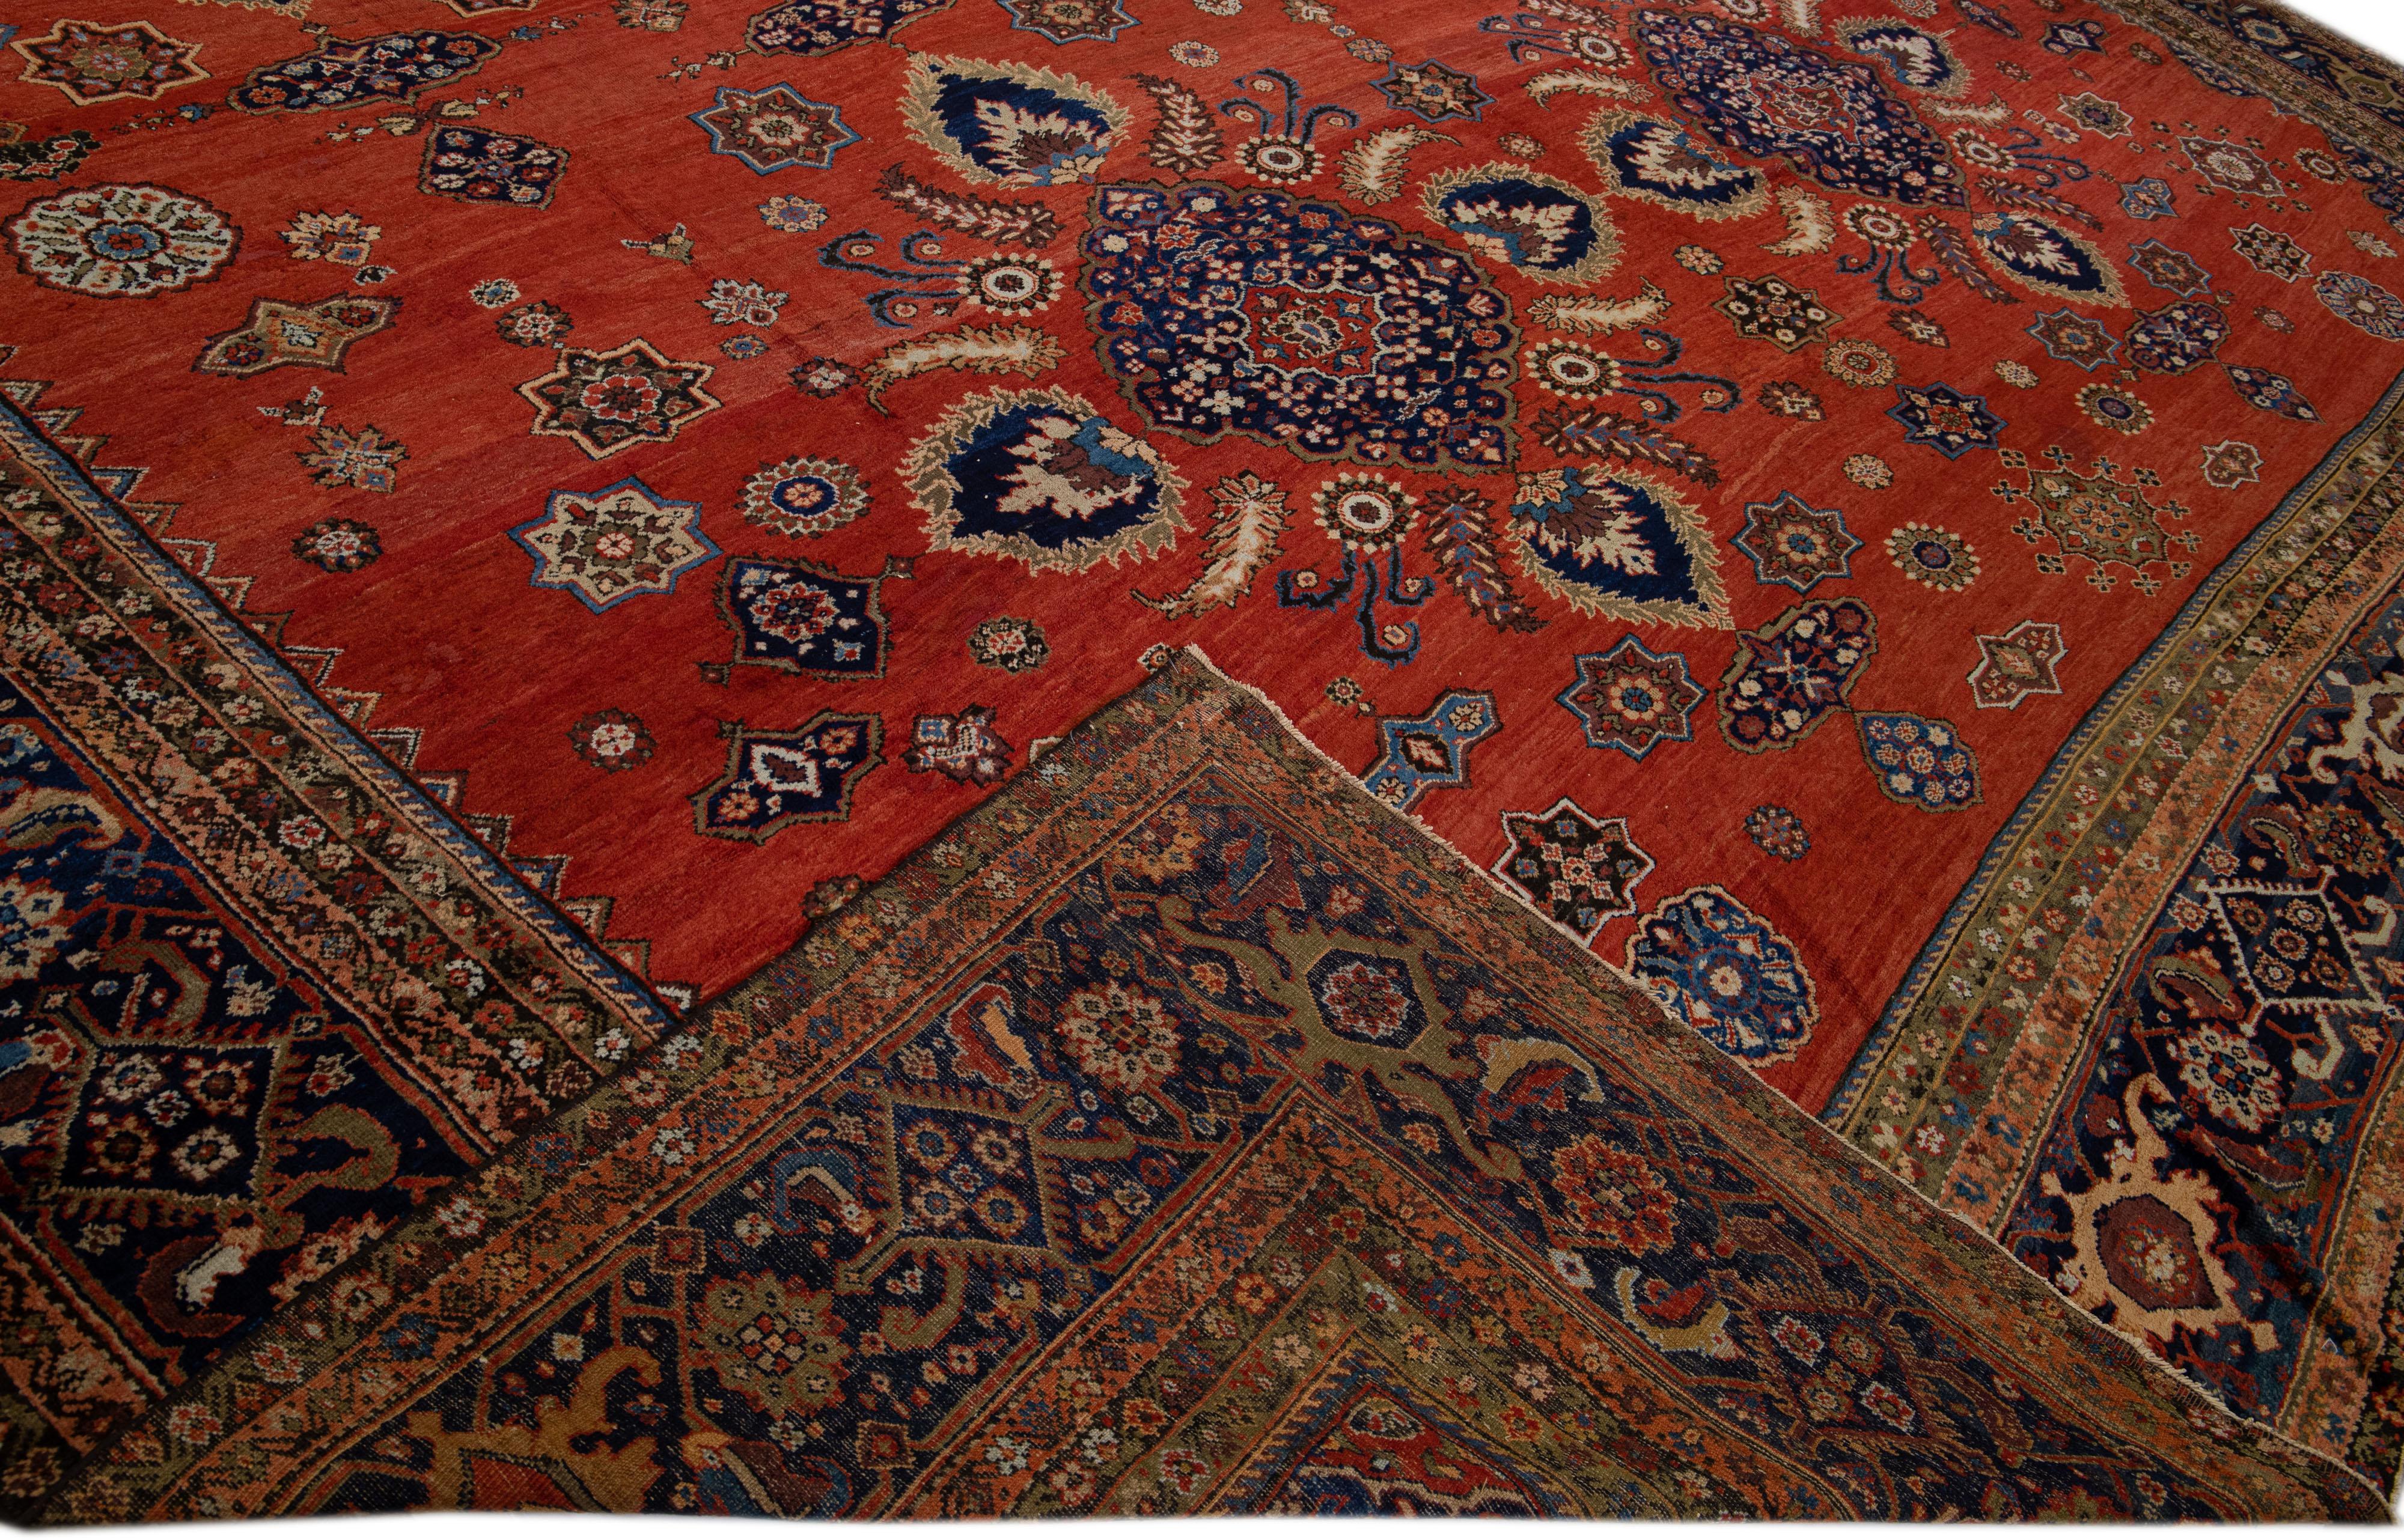 Beautiful antique Persian Sultanabad hand-knotted wool rug with a red field. This piece has a navy blue color-designed frame with multicolor accents in a gorgeous all-over floral pattern design.

This rug measures: 18'6